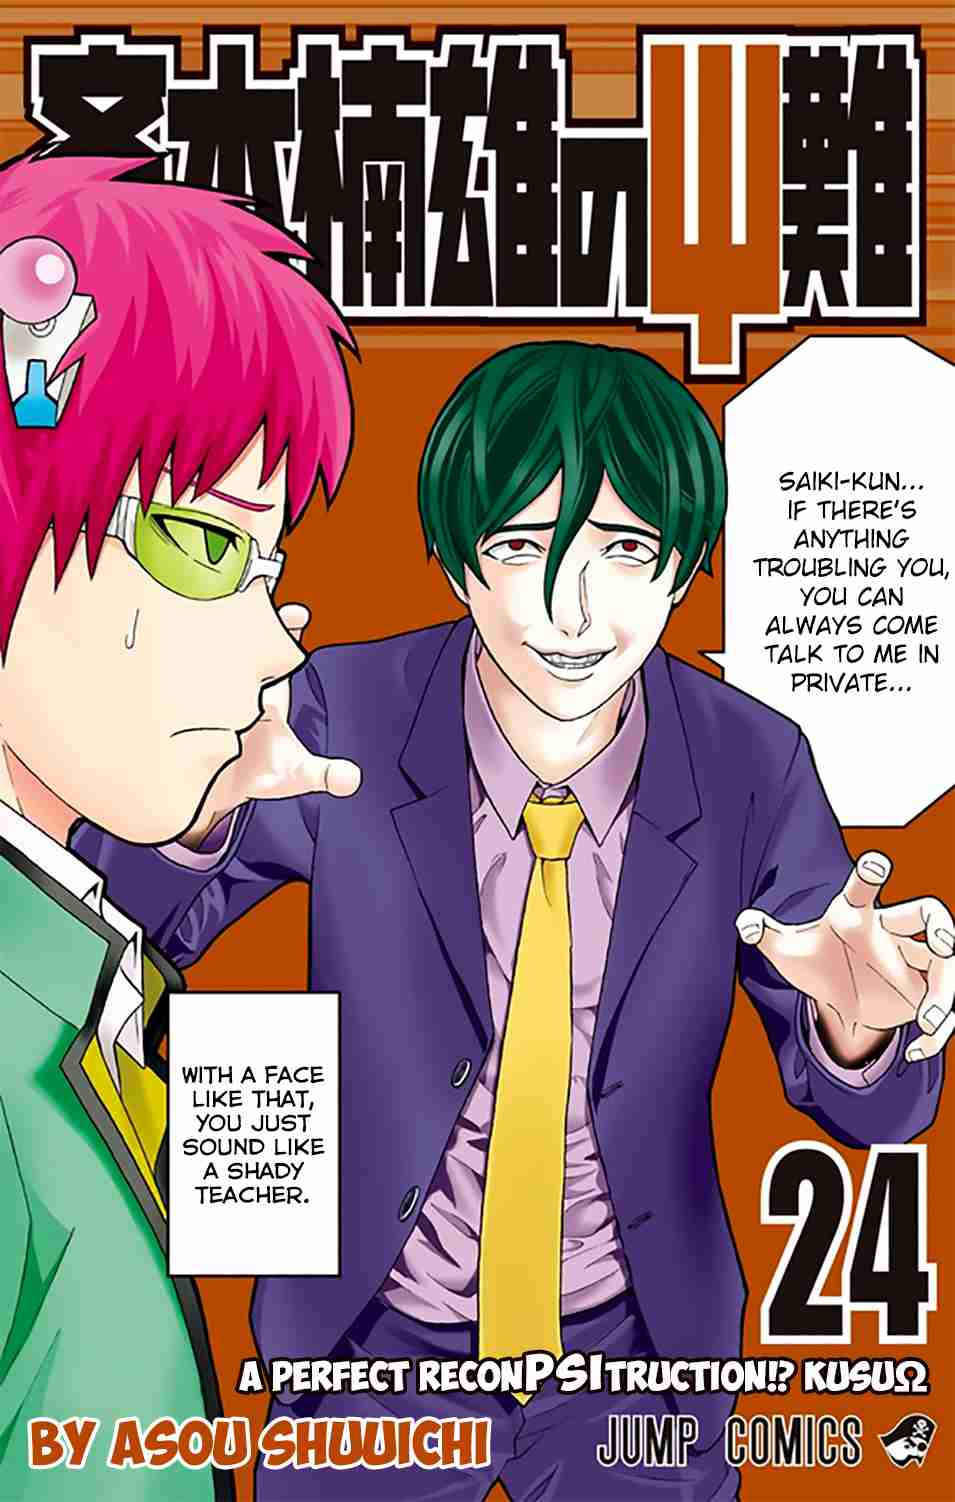 Saiki Kusuo no PSI nan Vol. 24 Ch. 251 ViPSIting a Friend's House While Their Parents are Out